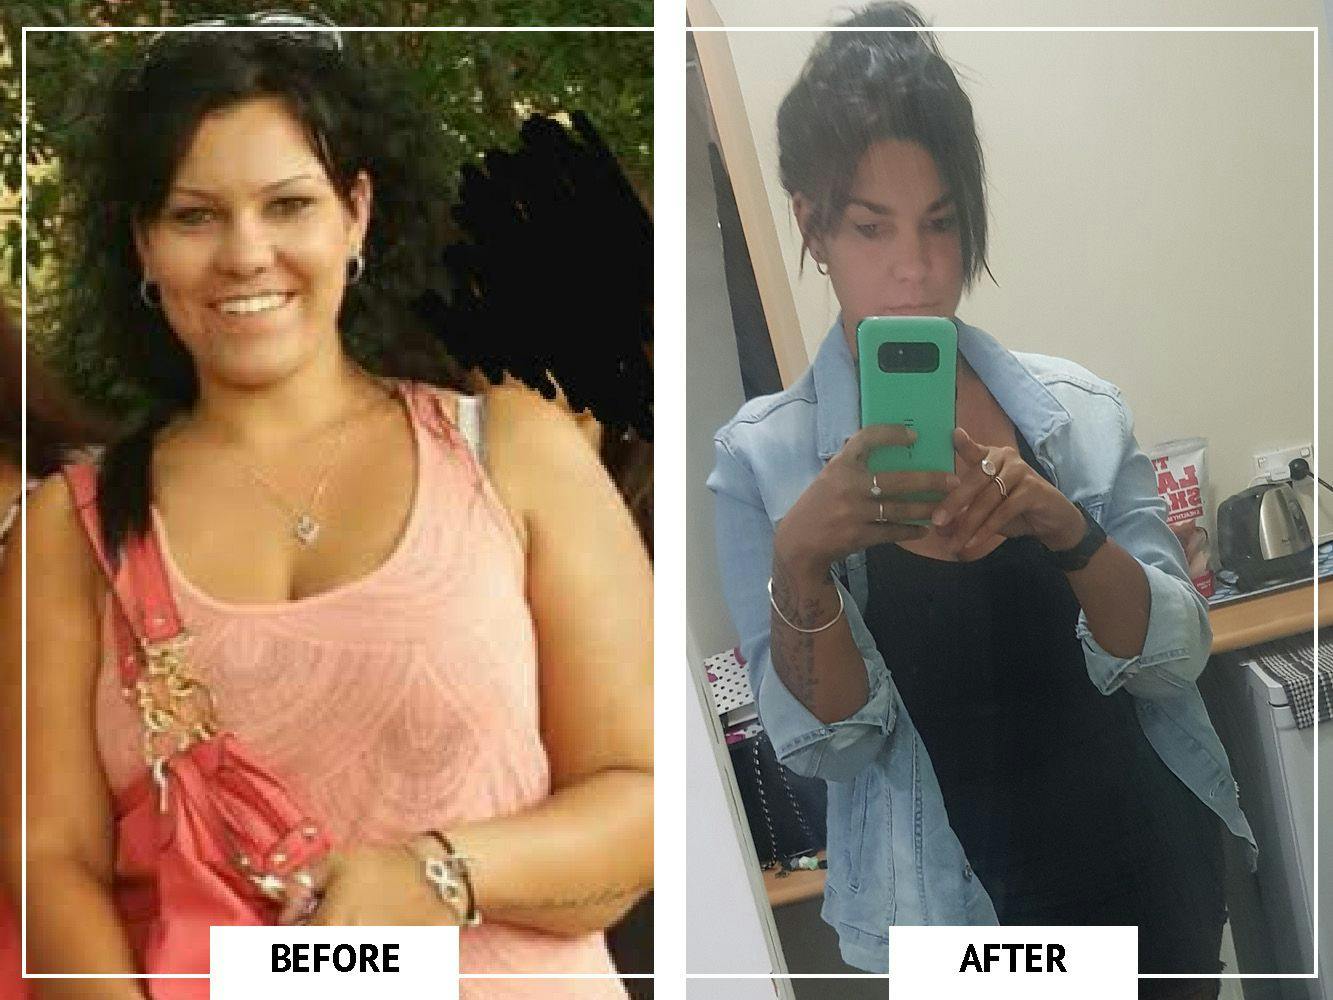 Miranda Lost 10kg with The Lady Shake!